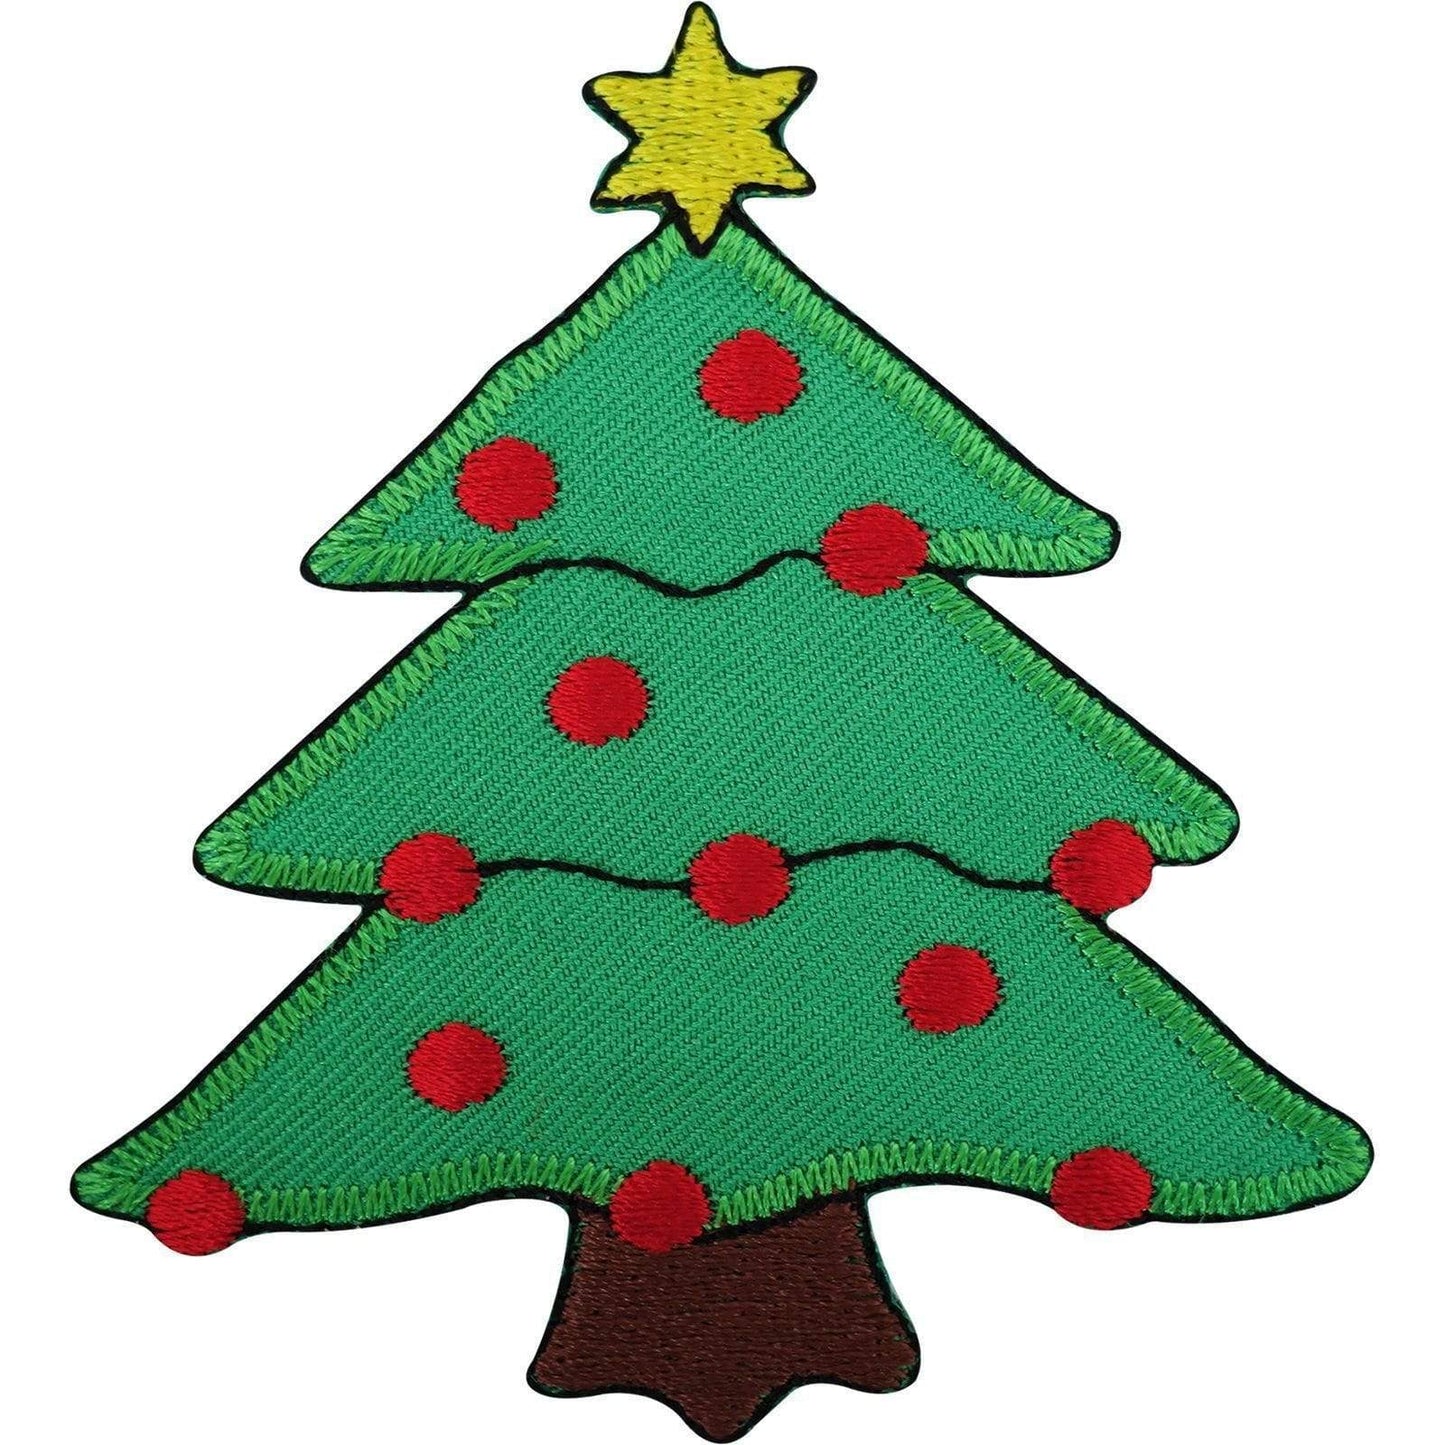 Christmas Tree Patch Iron On Badge / Sew On Embroidered Stocking XMAS Decoration